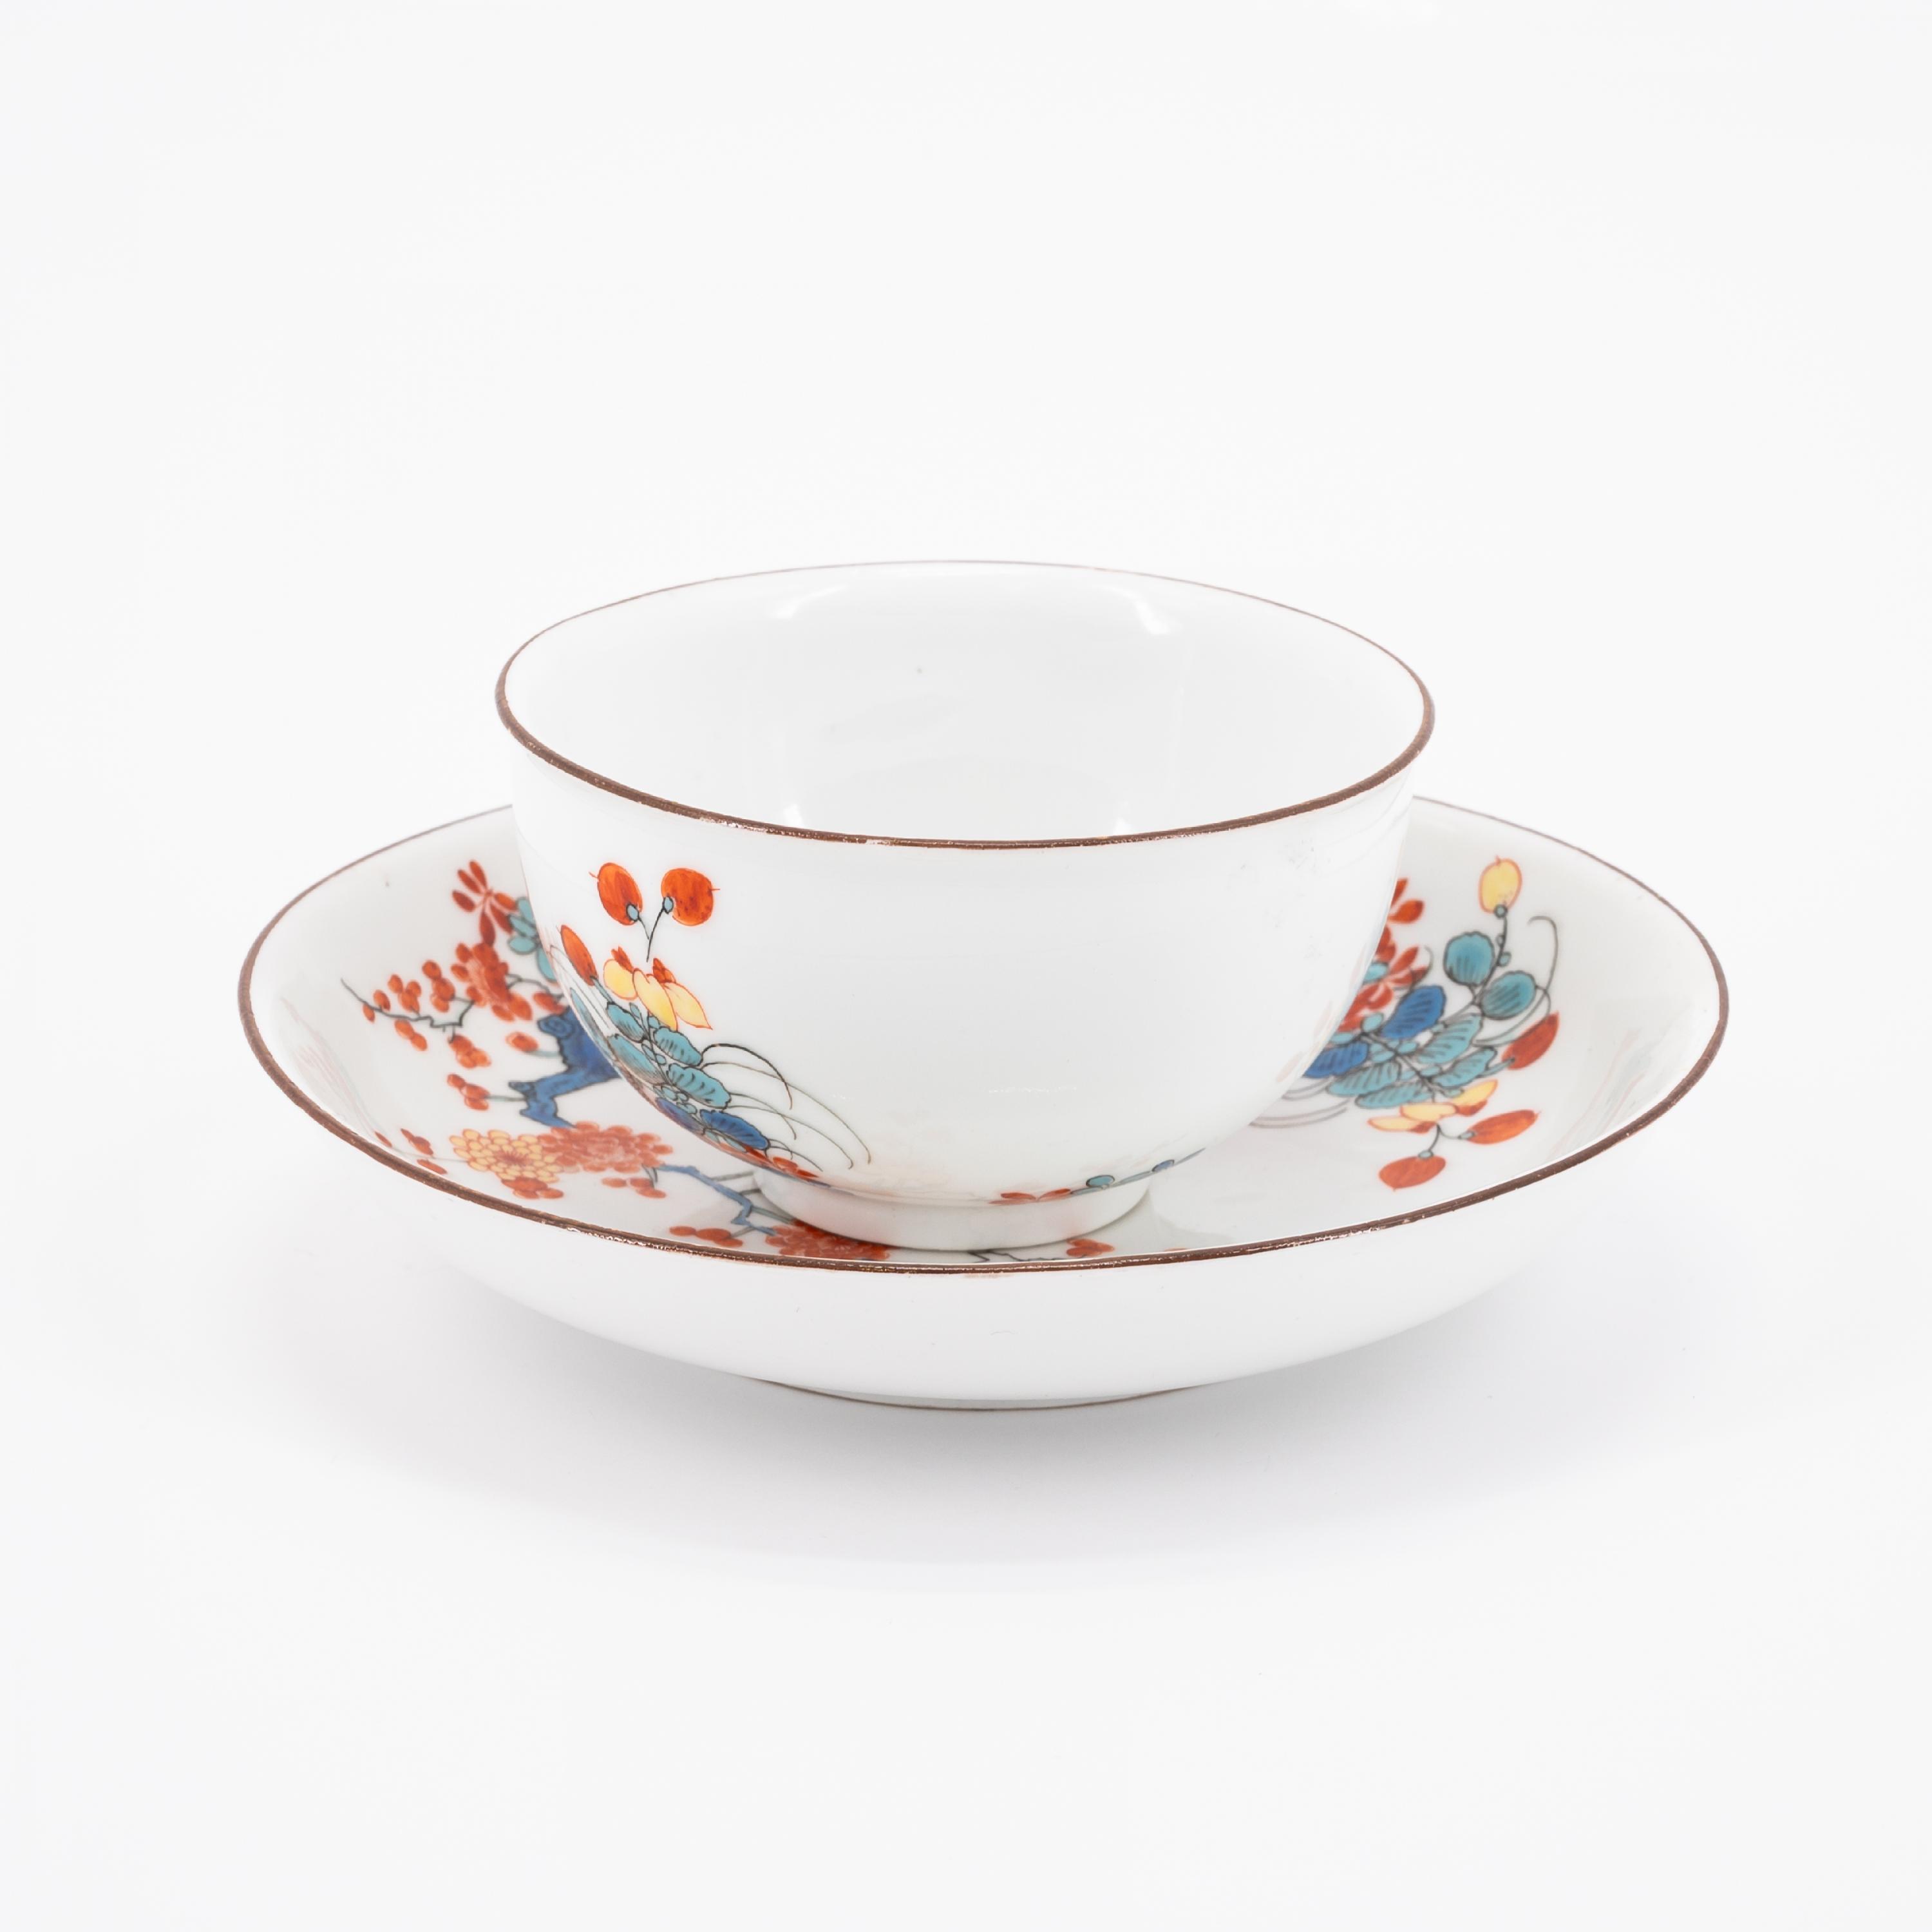 ONE PORCELAIN CUP AND SAUCER WITH QUAIL DECOR & TWO CUPS WITH PURPLE BACKGROUND AND BIRD DECOATIONS - Image 8 of 11